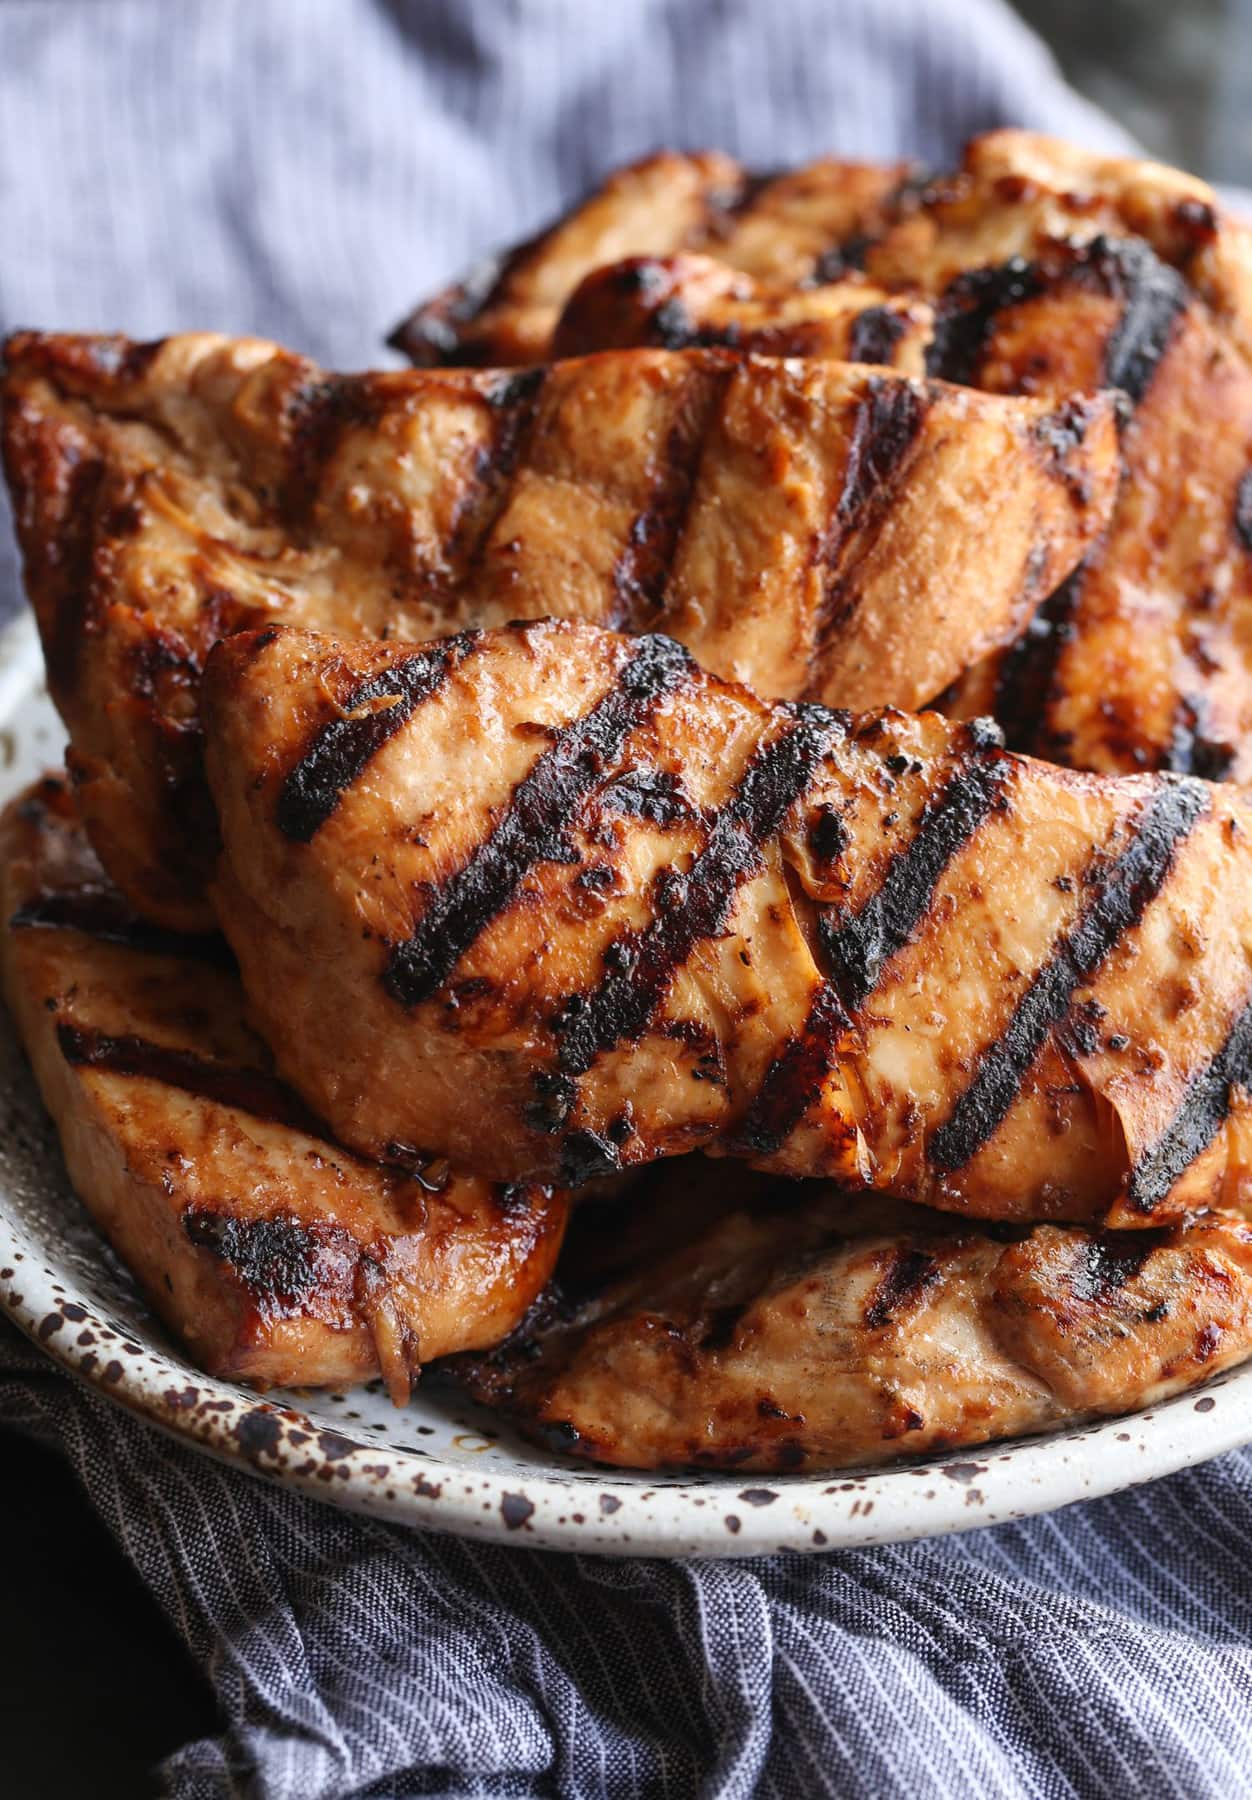 Grilled Chicken with marinade